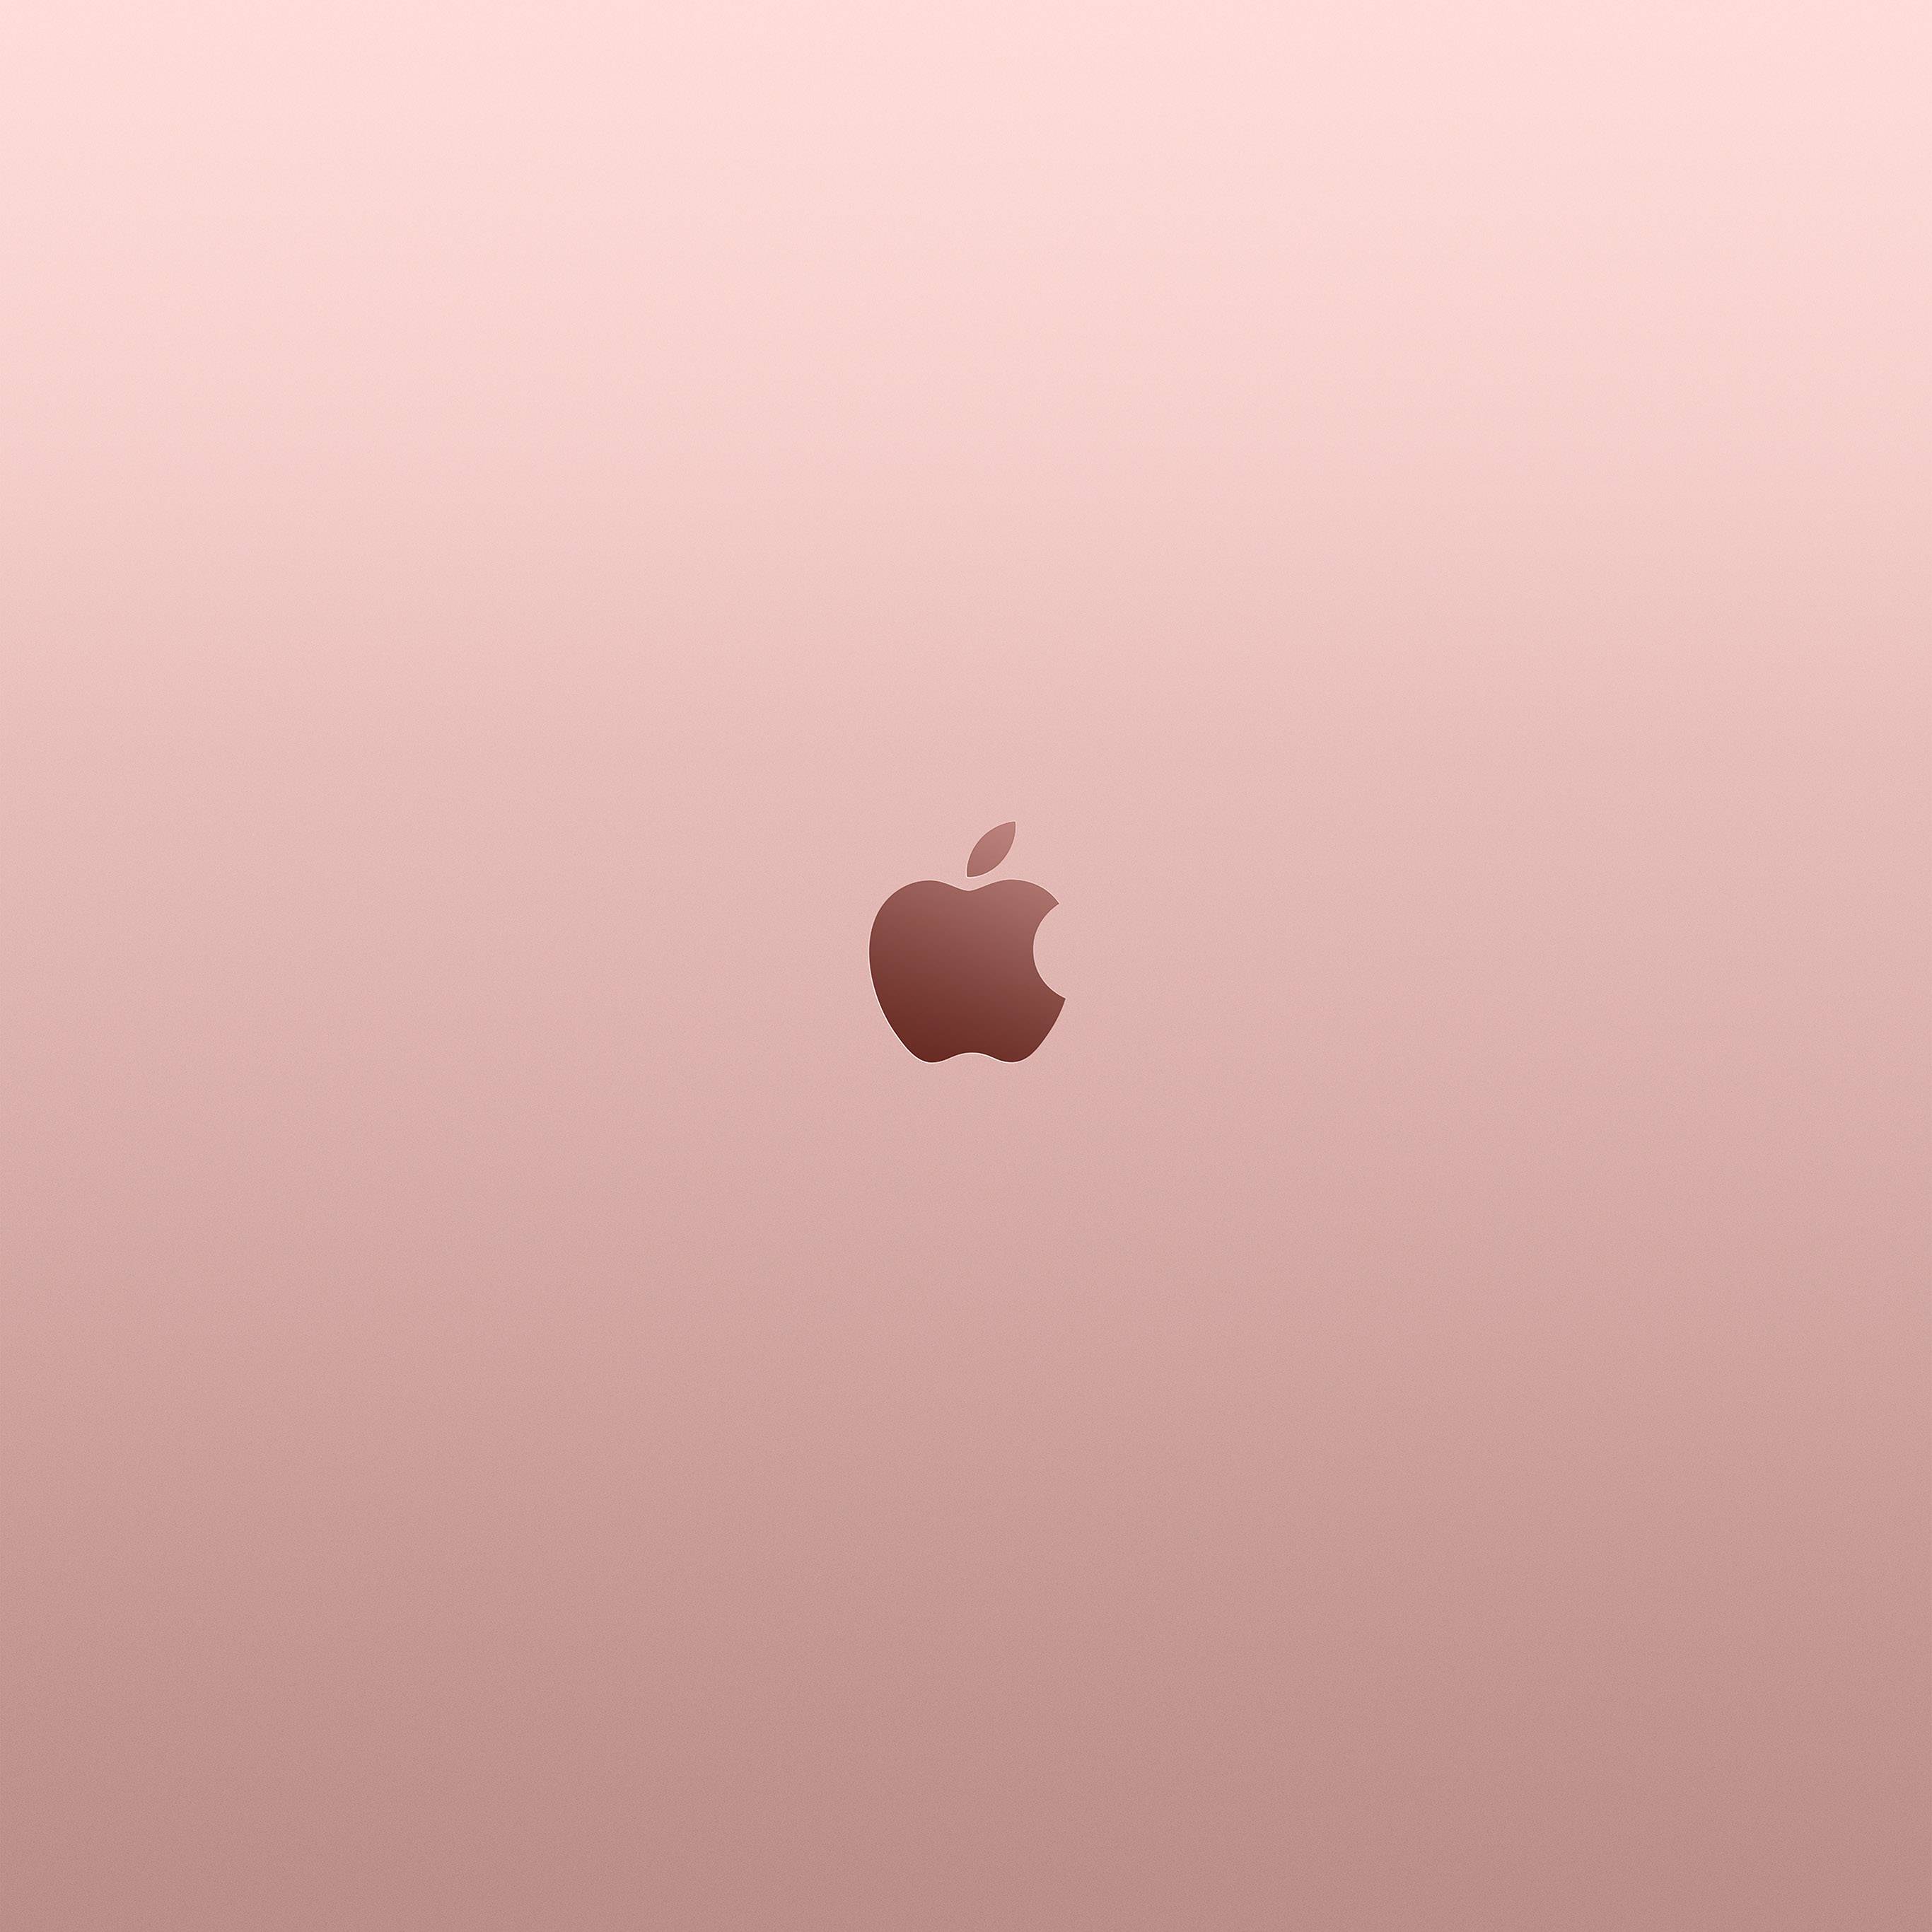 Rose Gold iPad Wallpapers - Top Free Rose Gold iPad Backgrounds